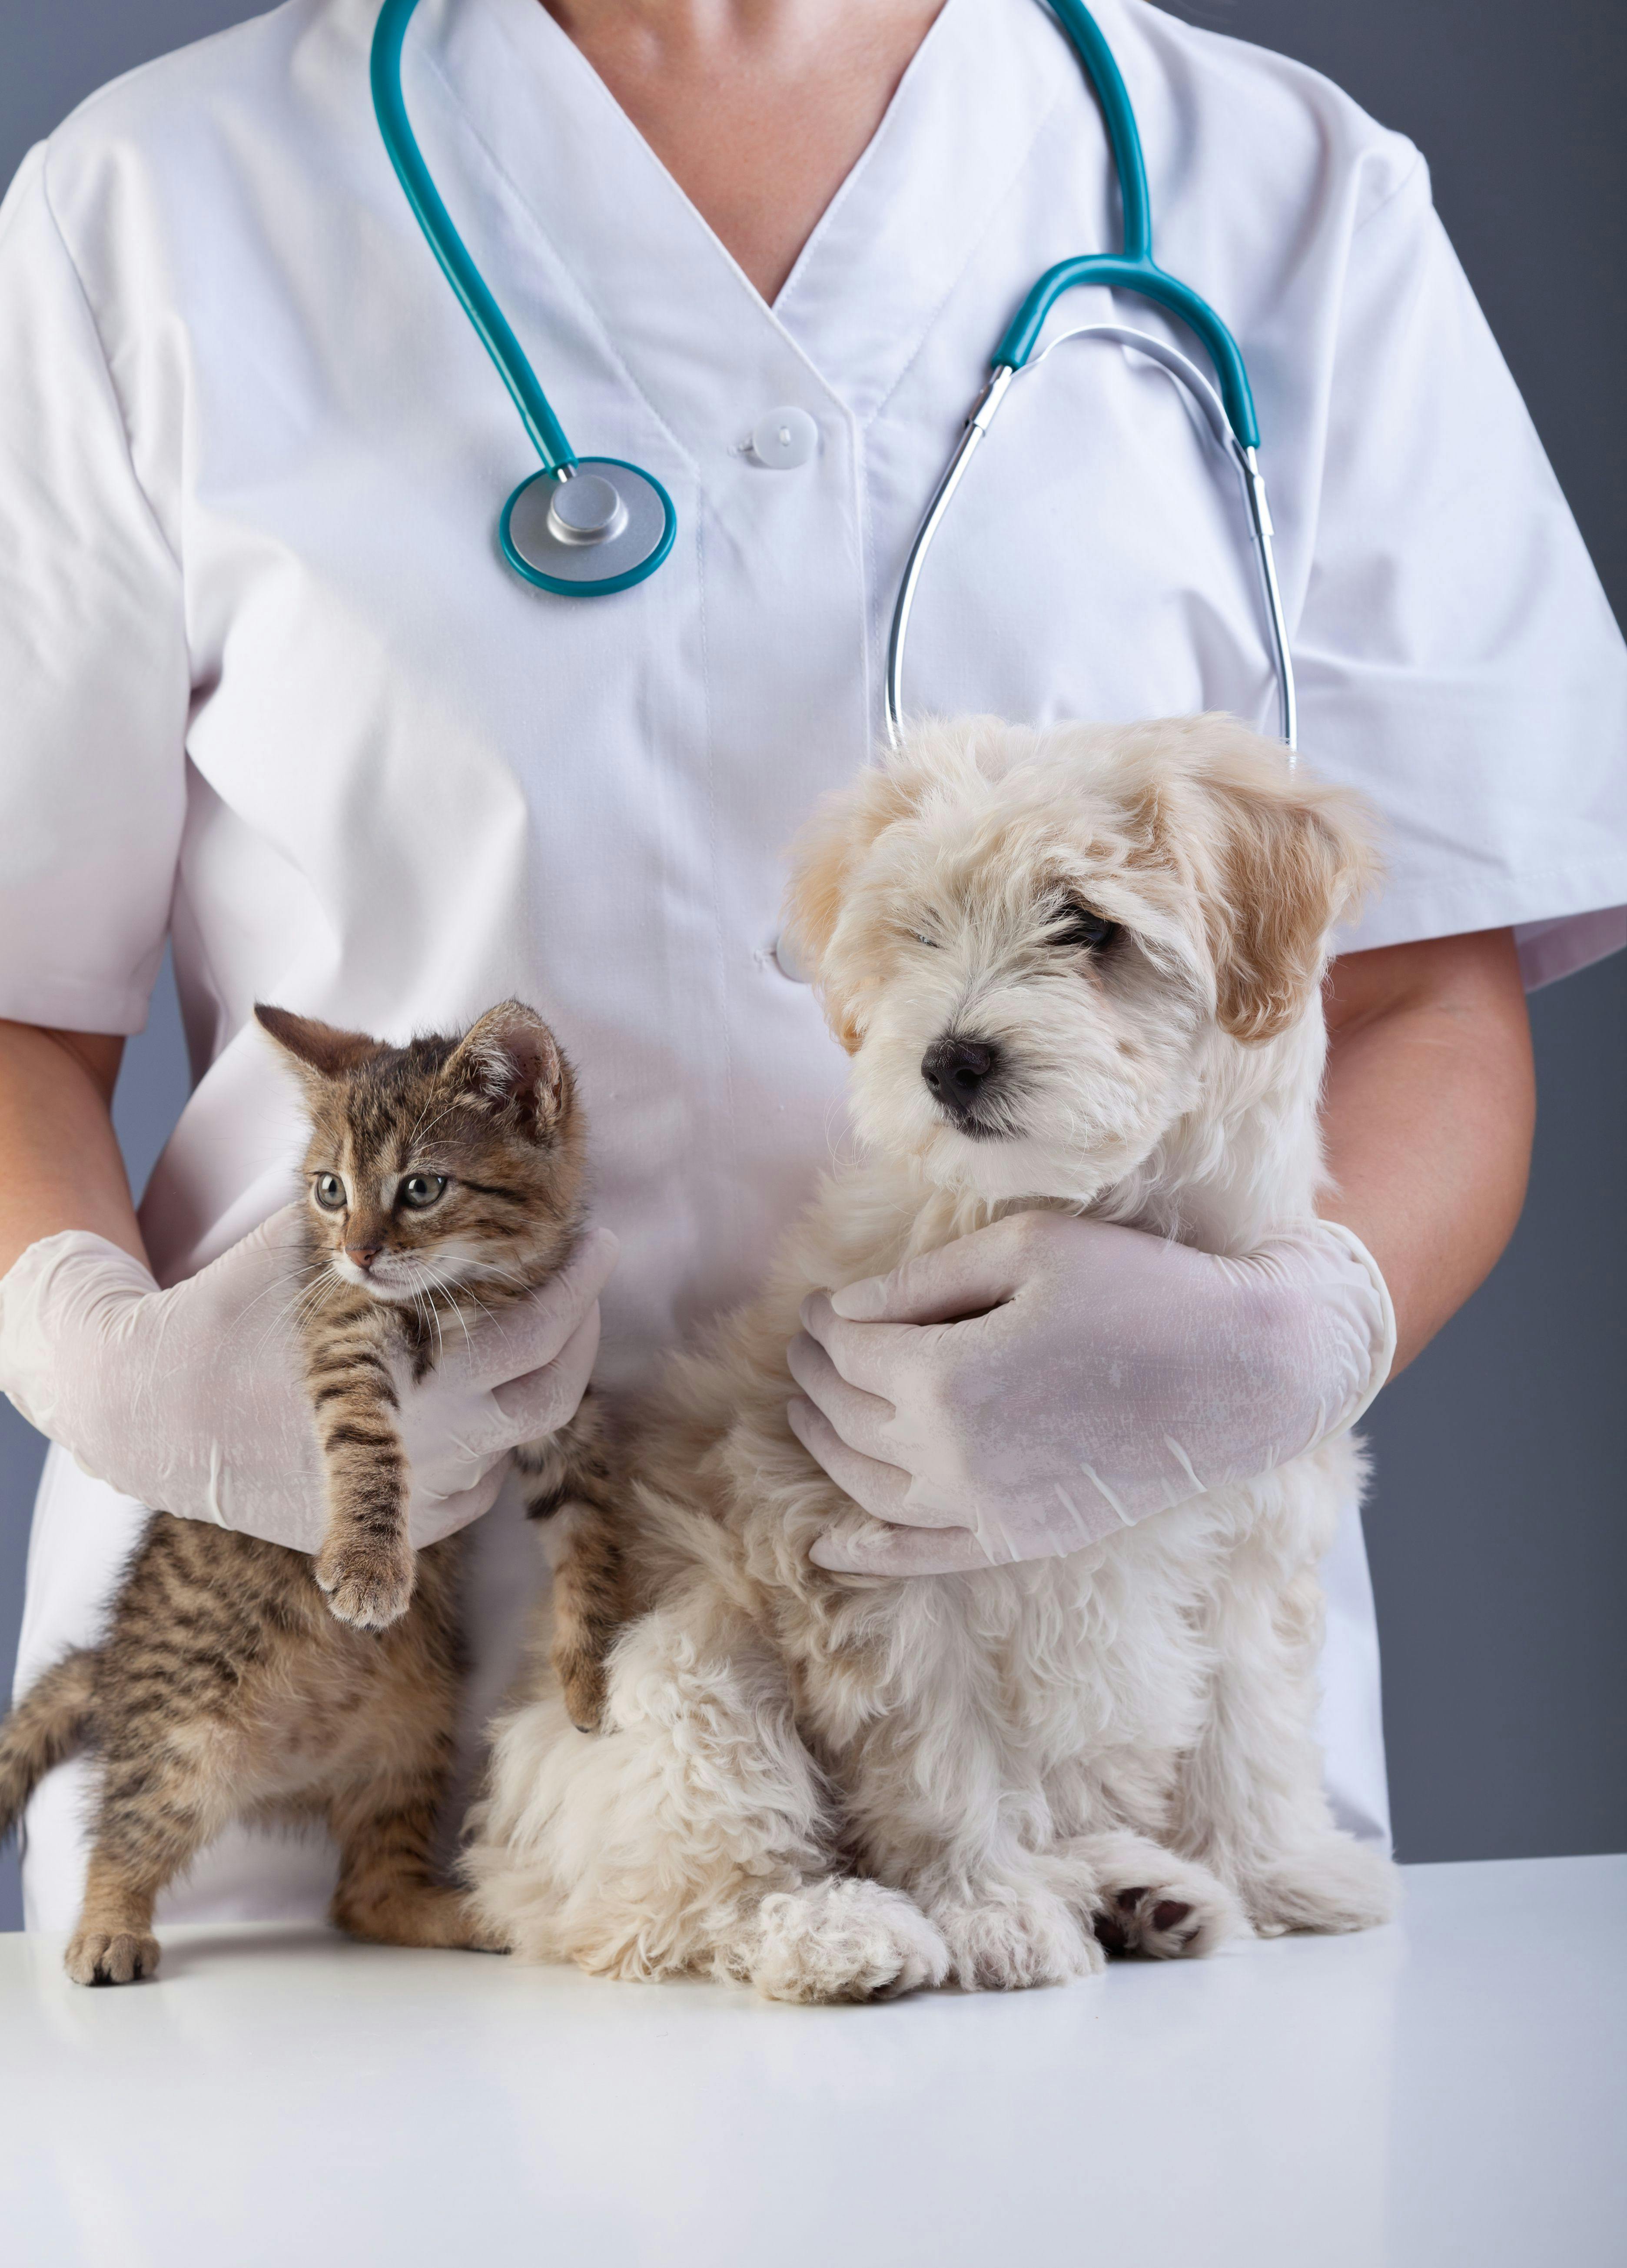 The flash glucose monitoring system: an invaluable tool for diabetic cats and dogs